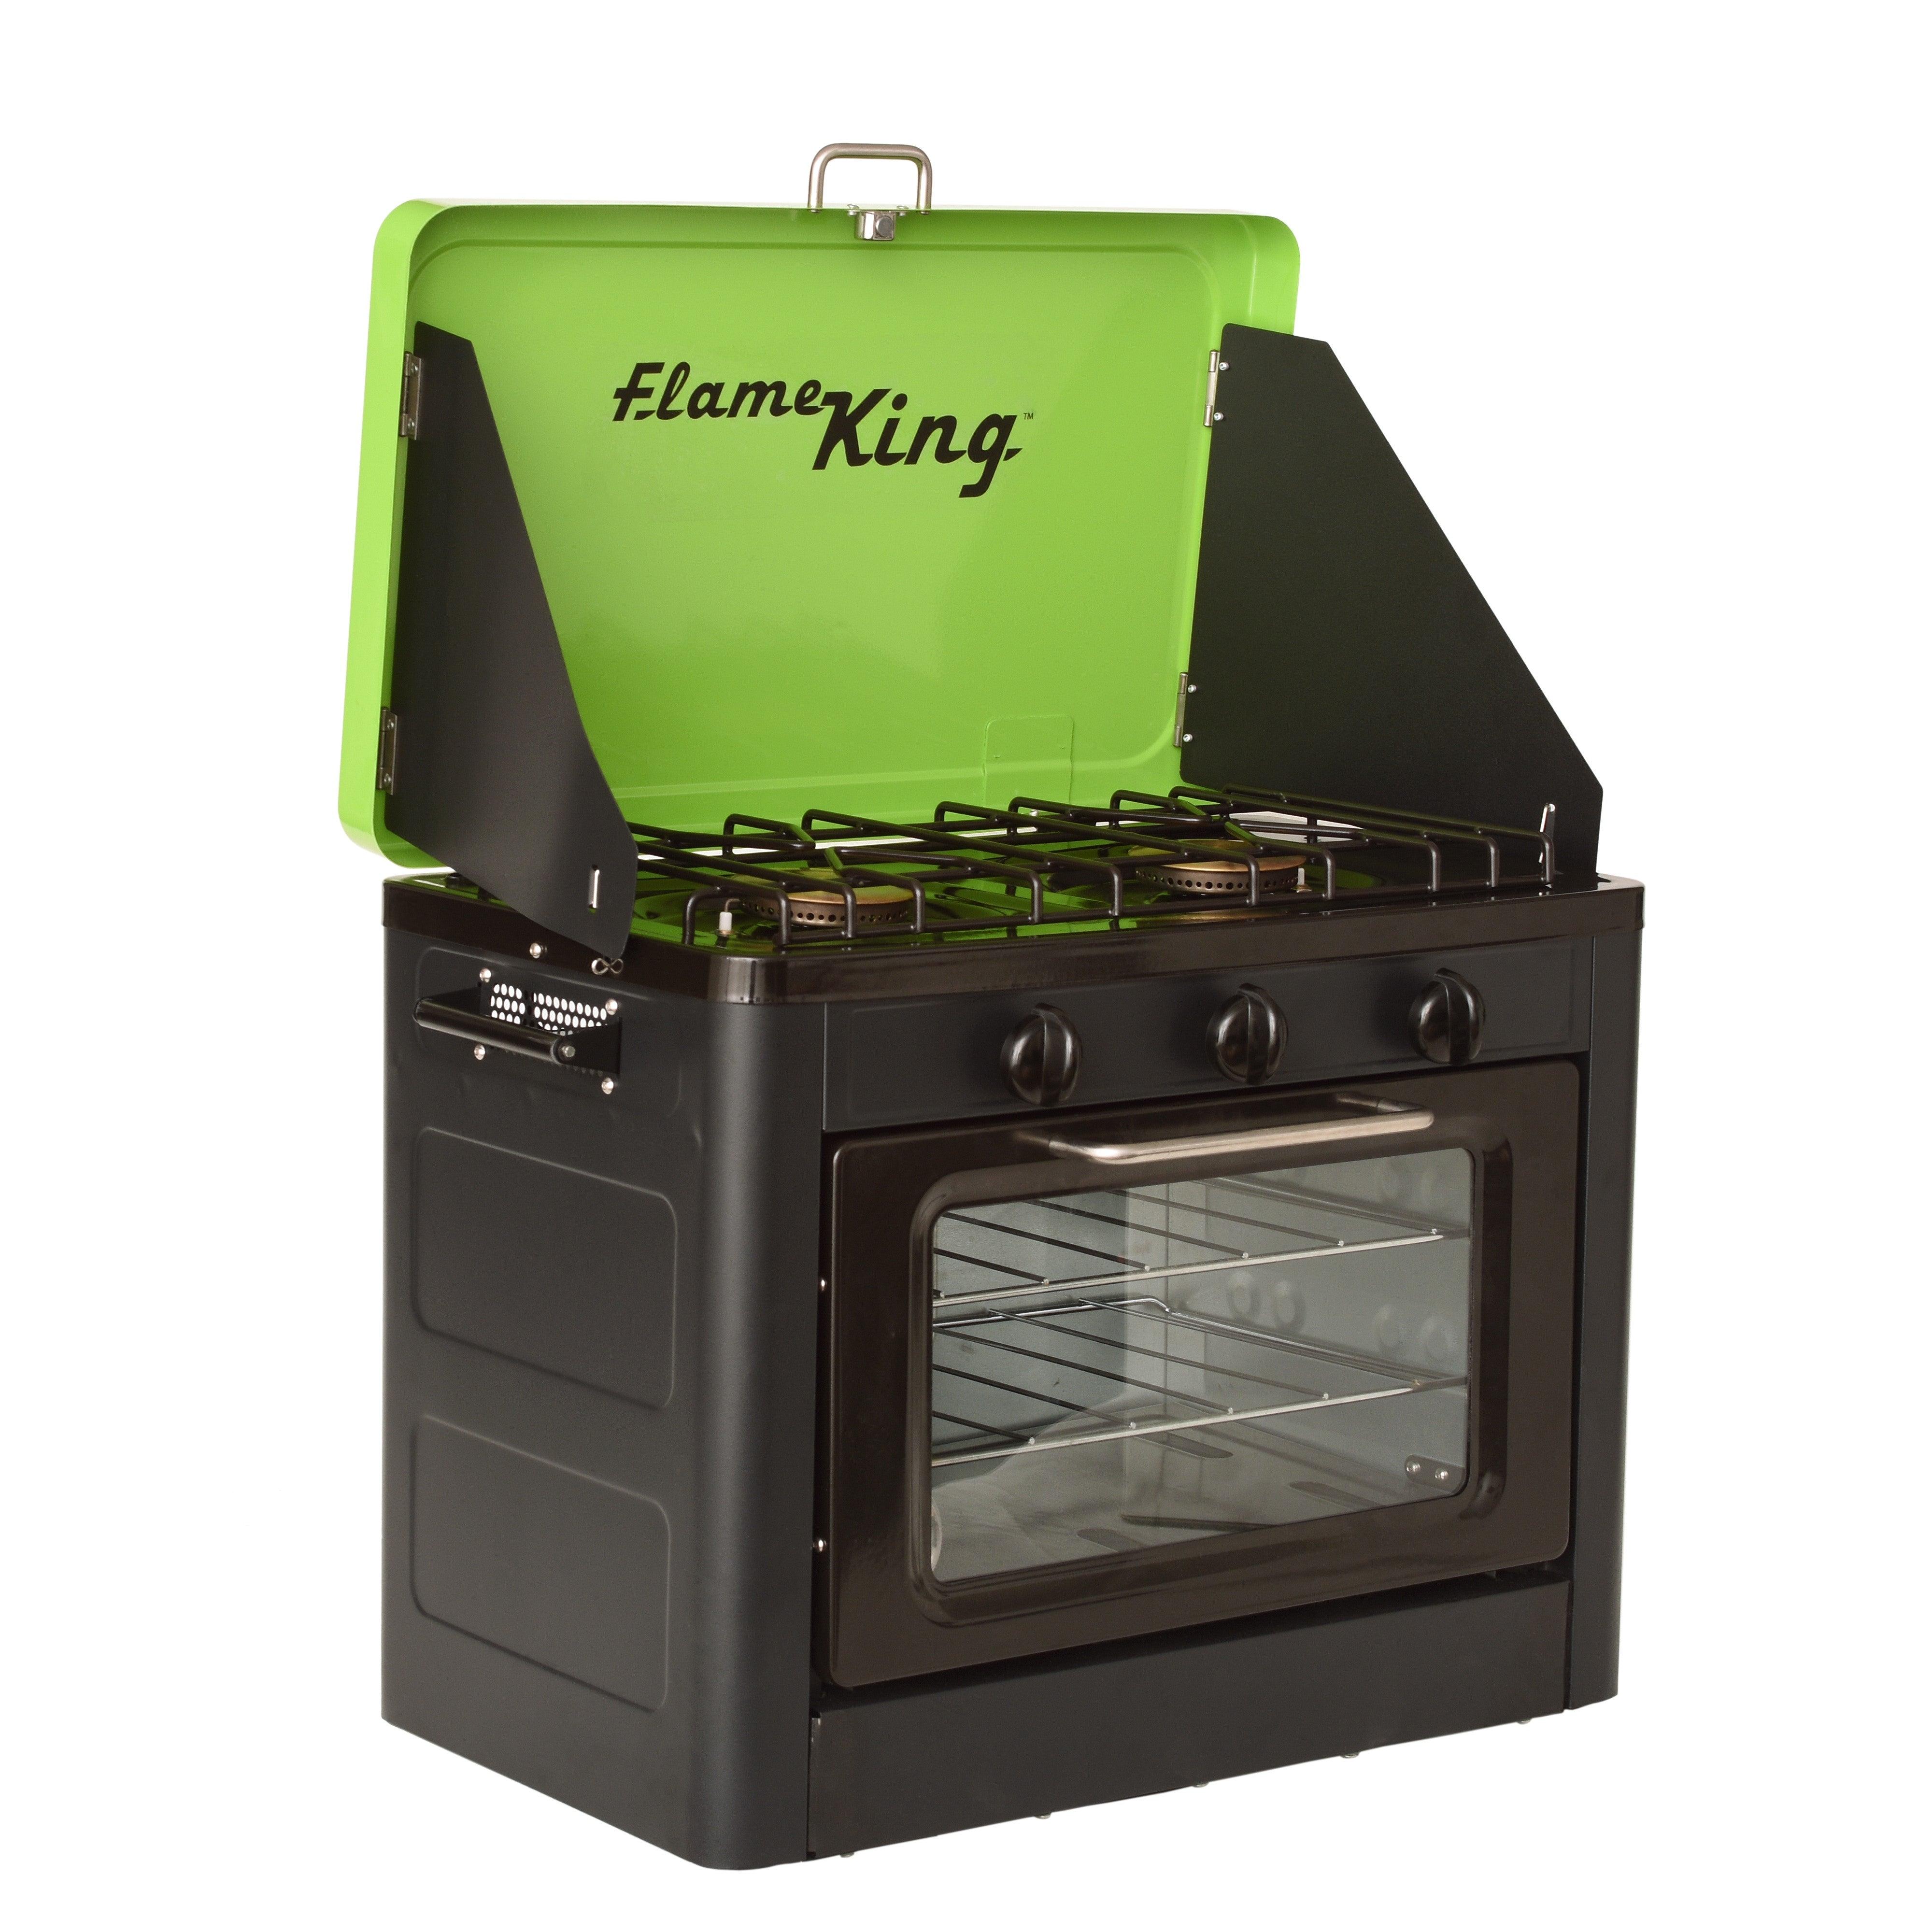 Flame King Portable Outdoor Propane Oven Stove Combo for Camping, RV,  Tailgating, Trailer, Green/Black (YSNHT-300)